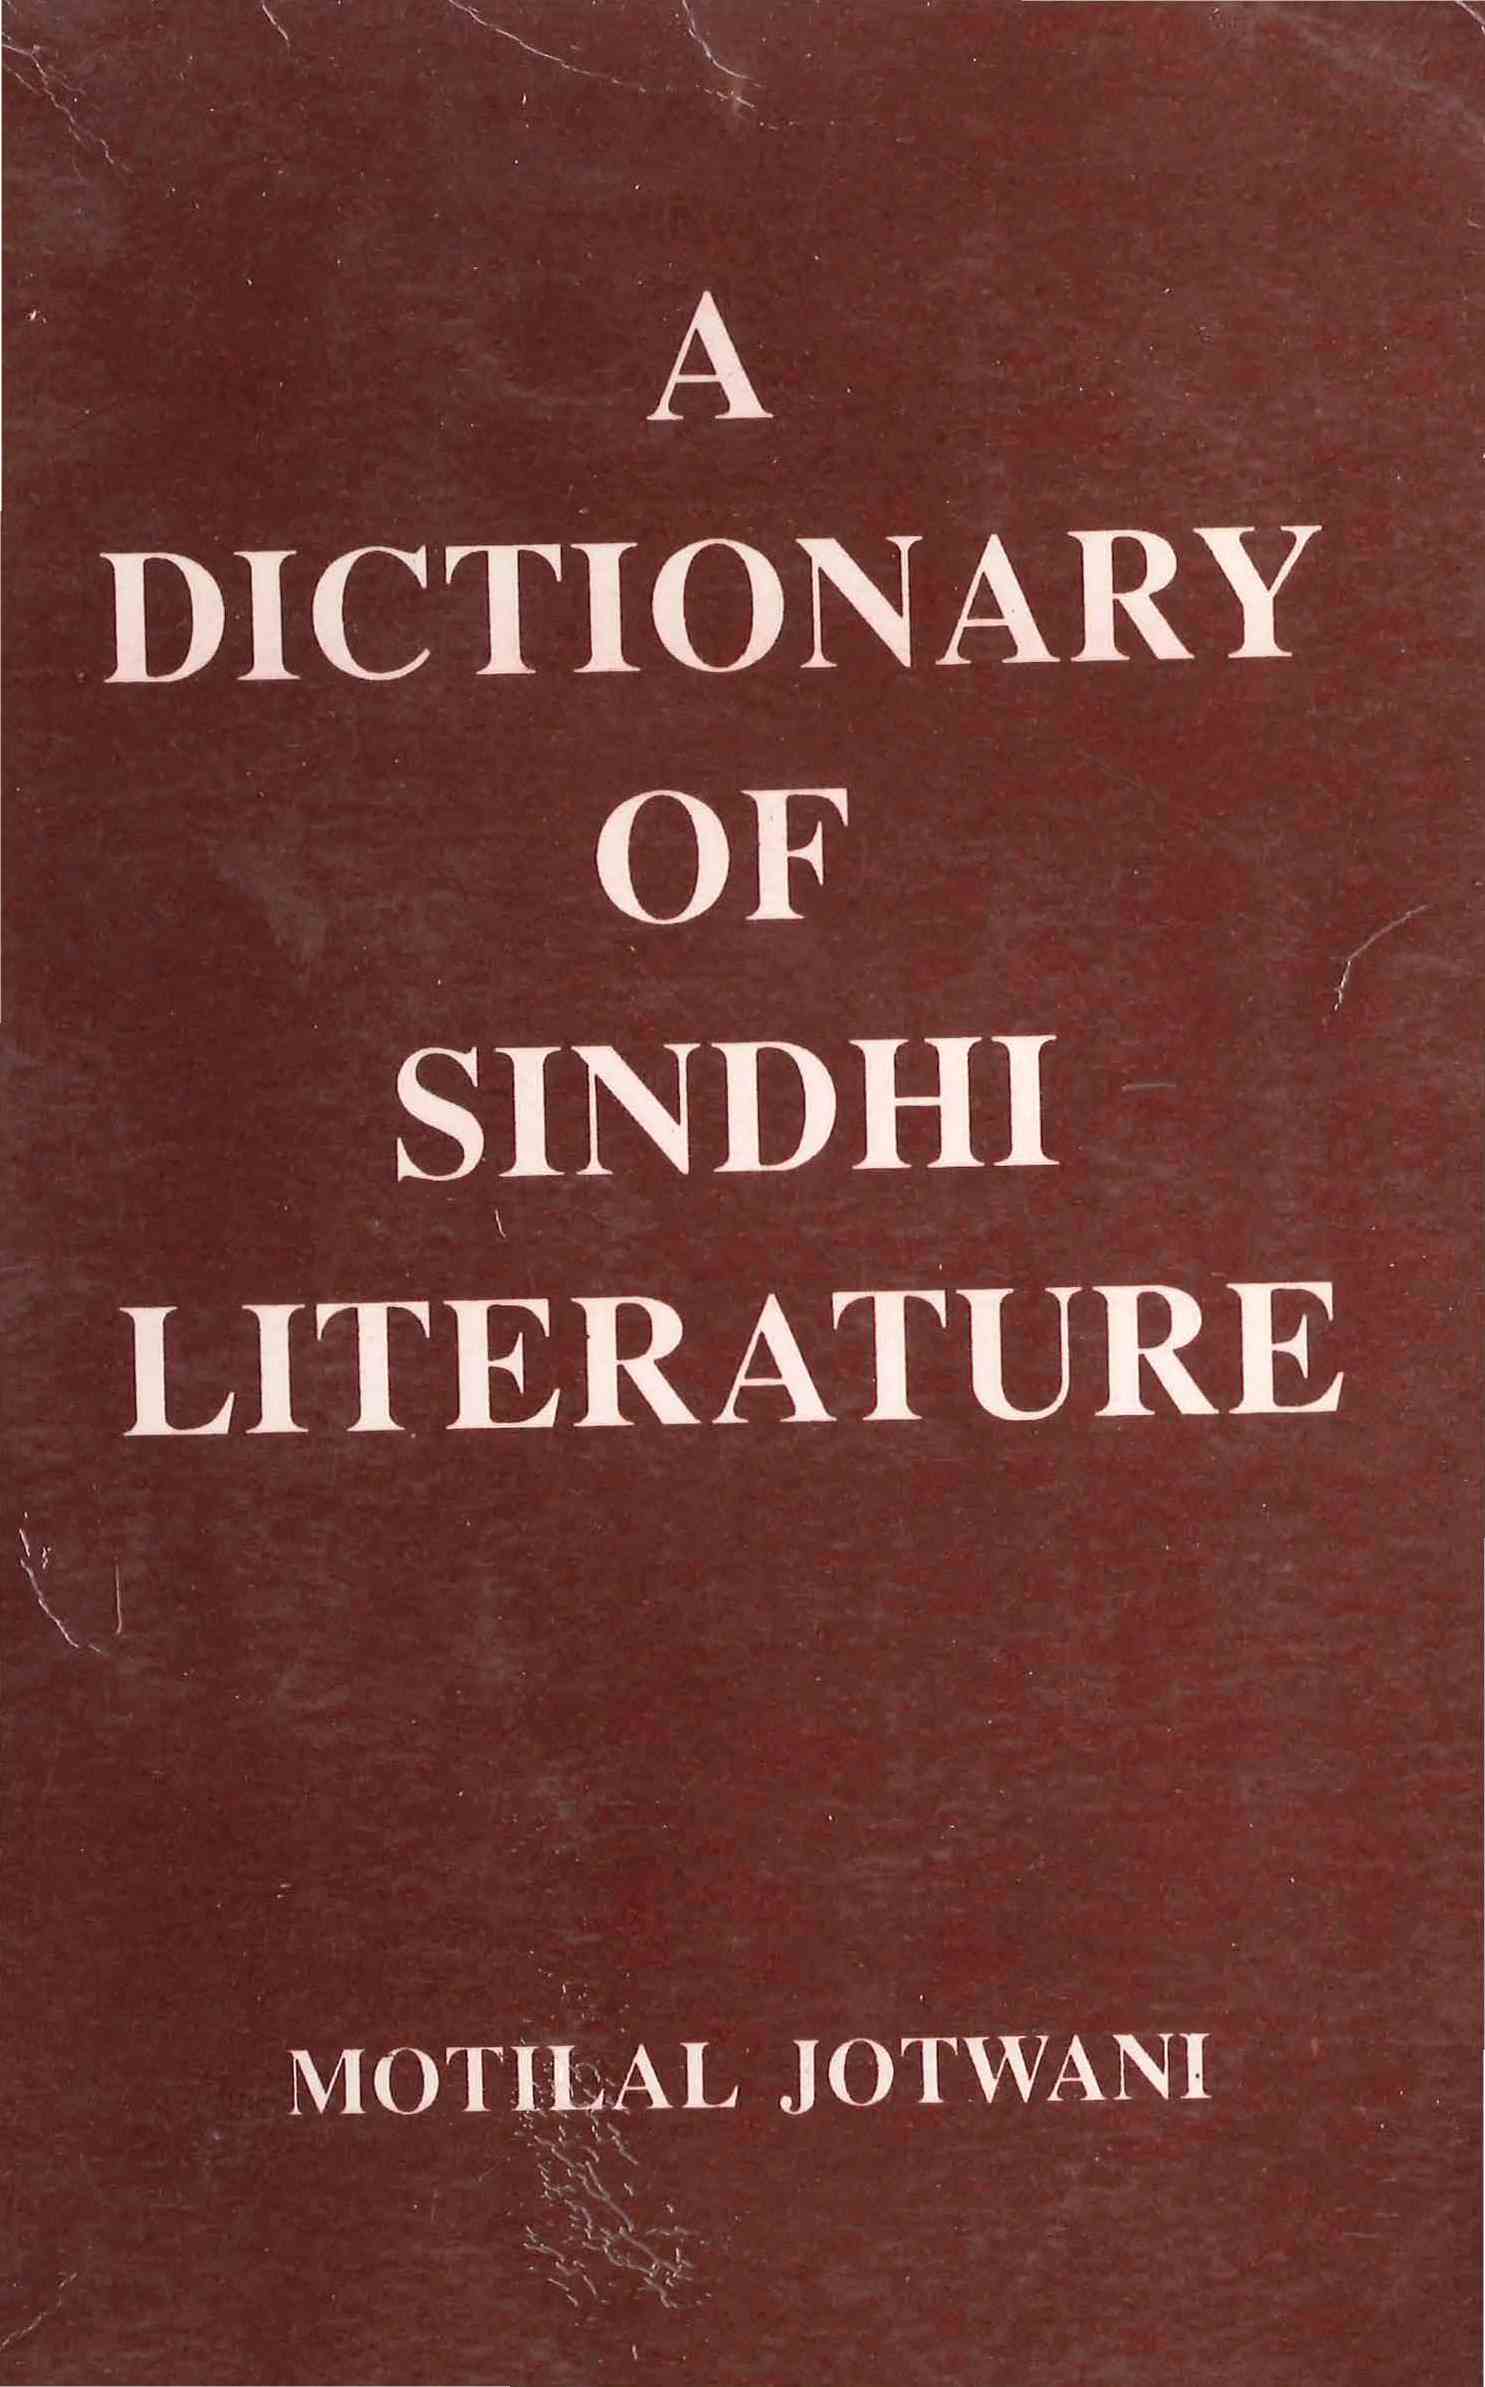 A Dictionary of Sindhi Literature